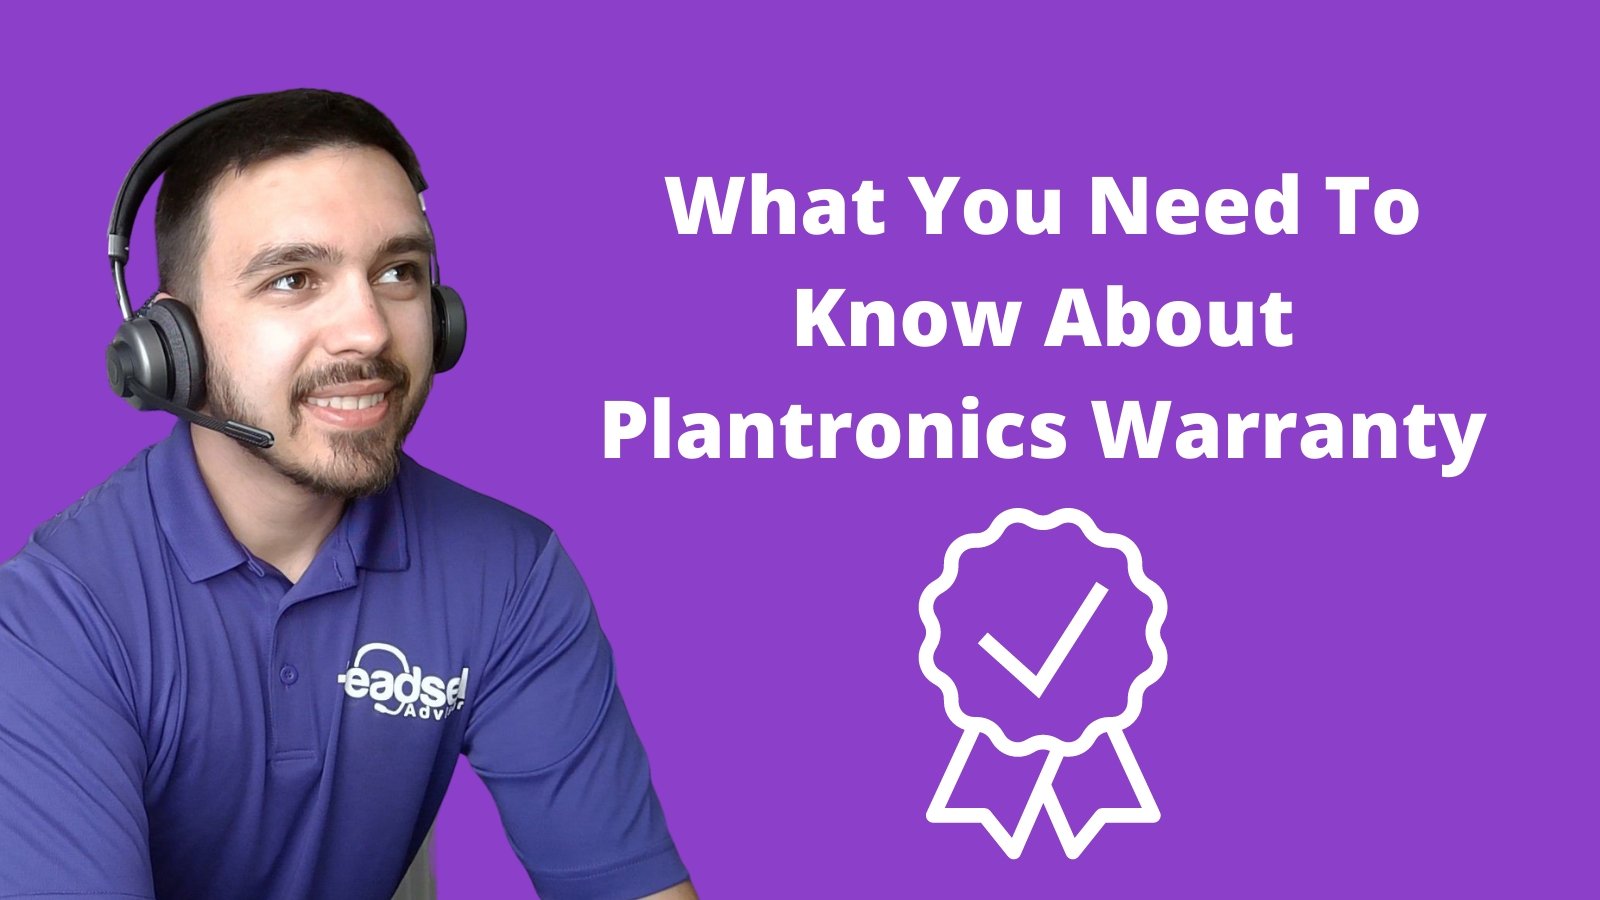 What You Need To Know About Plantronics Warranty - Headset Advisor